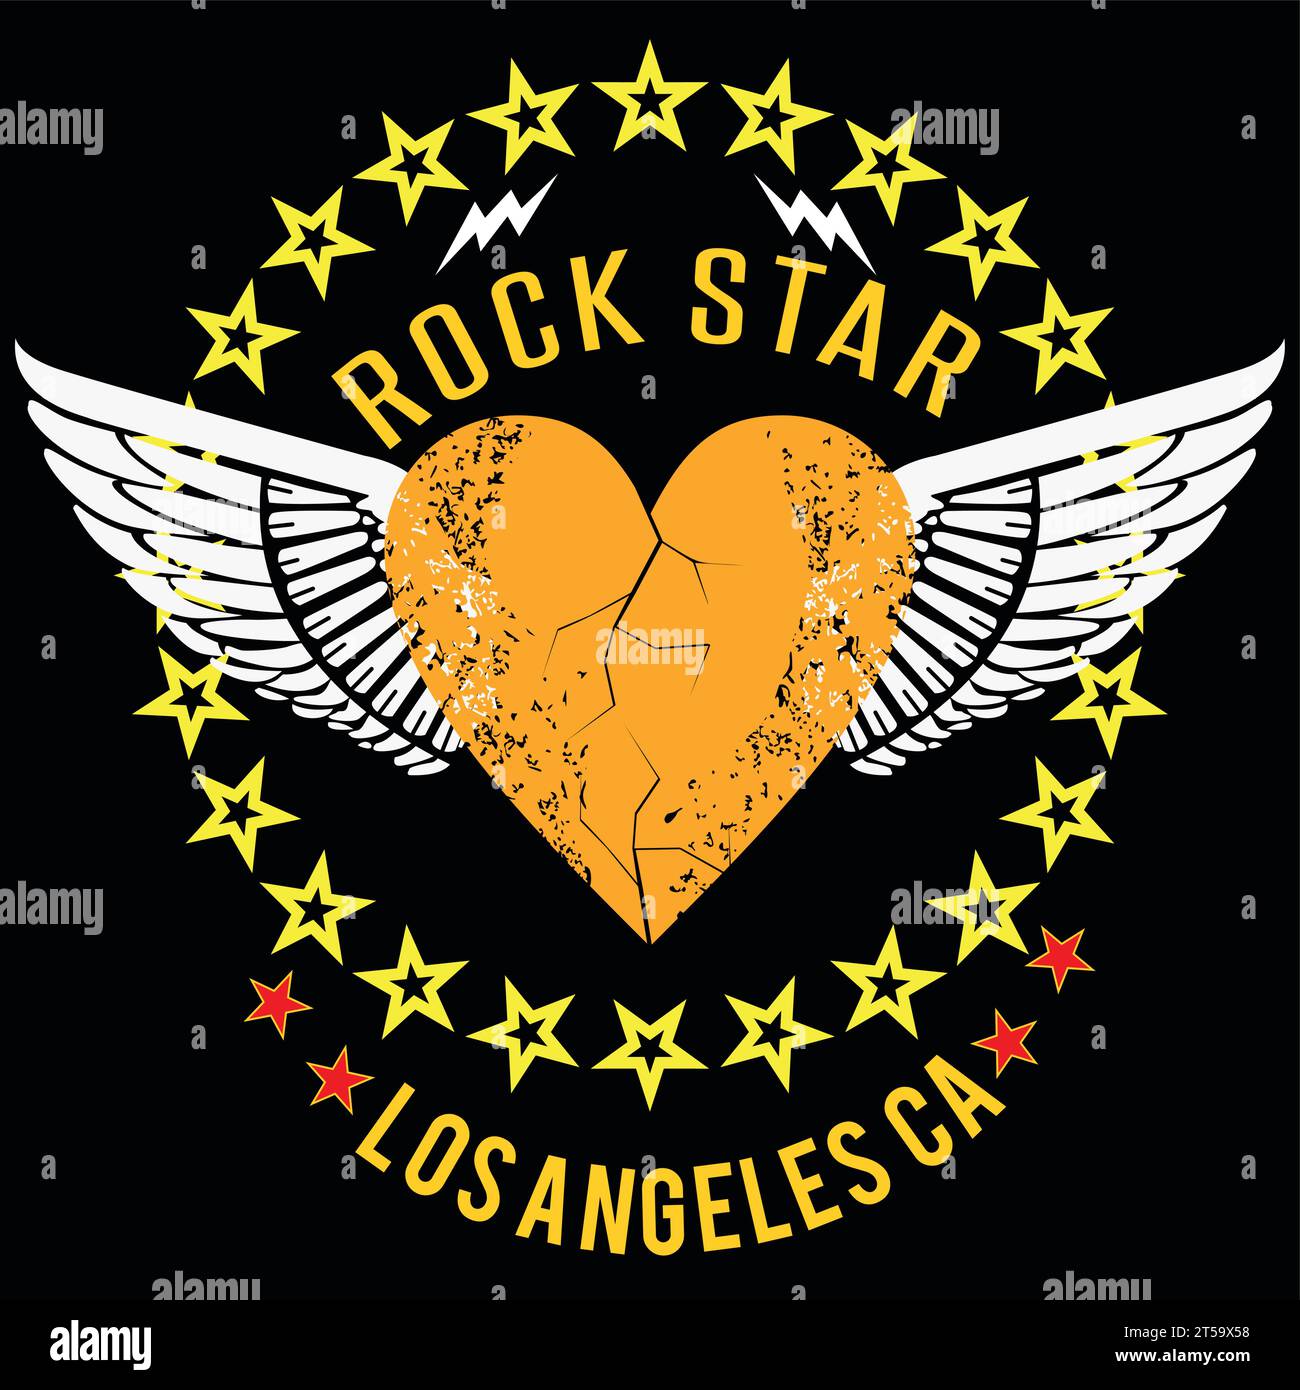 Rock Star. T-shirt design with an orange winged heart surrounded by small stars. Good illustration for Valentine's Day. Stock Vector